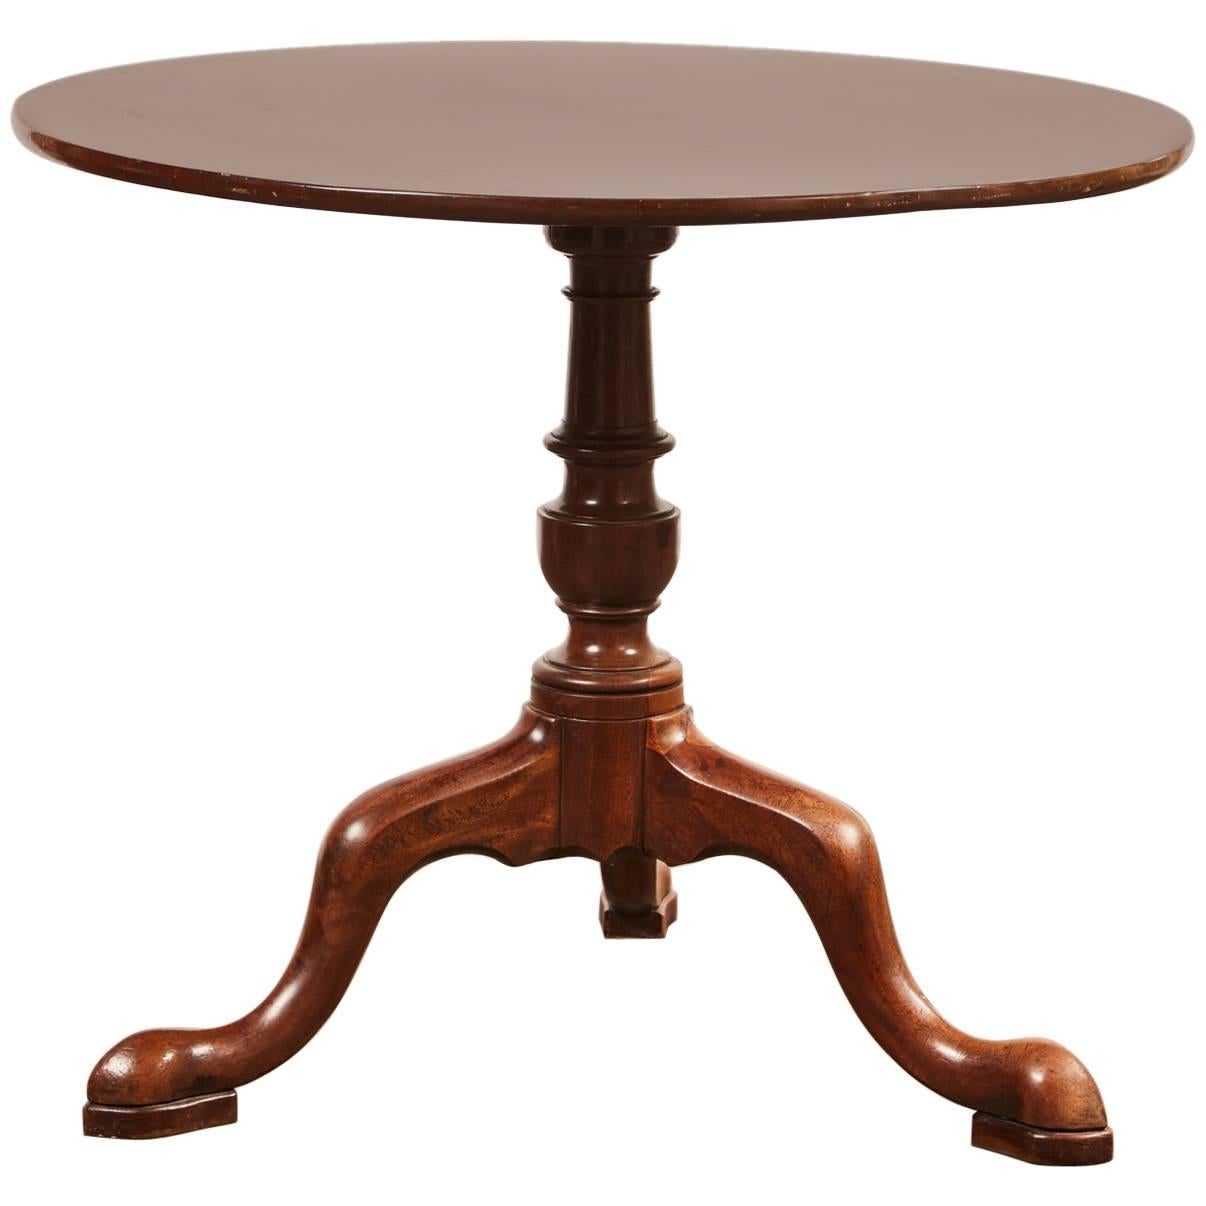 19th Century Queen Anne English Mahogany Pedestal Table